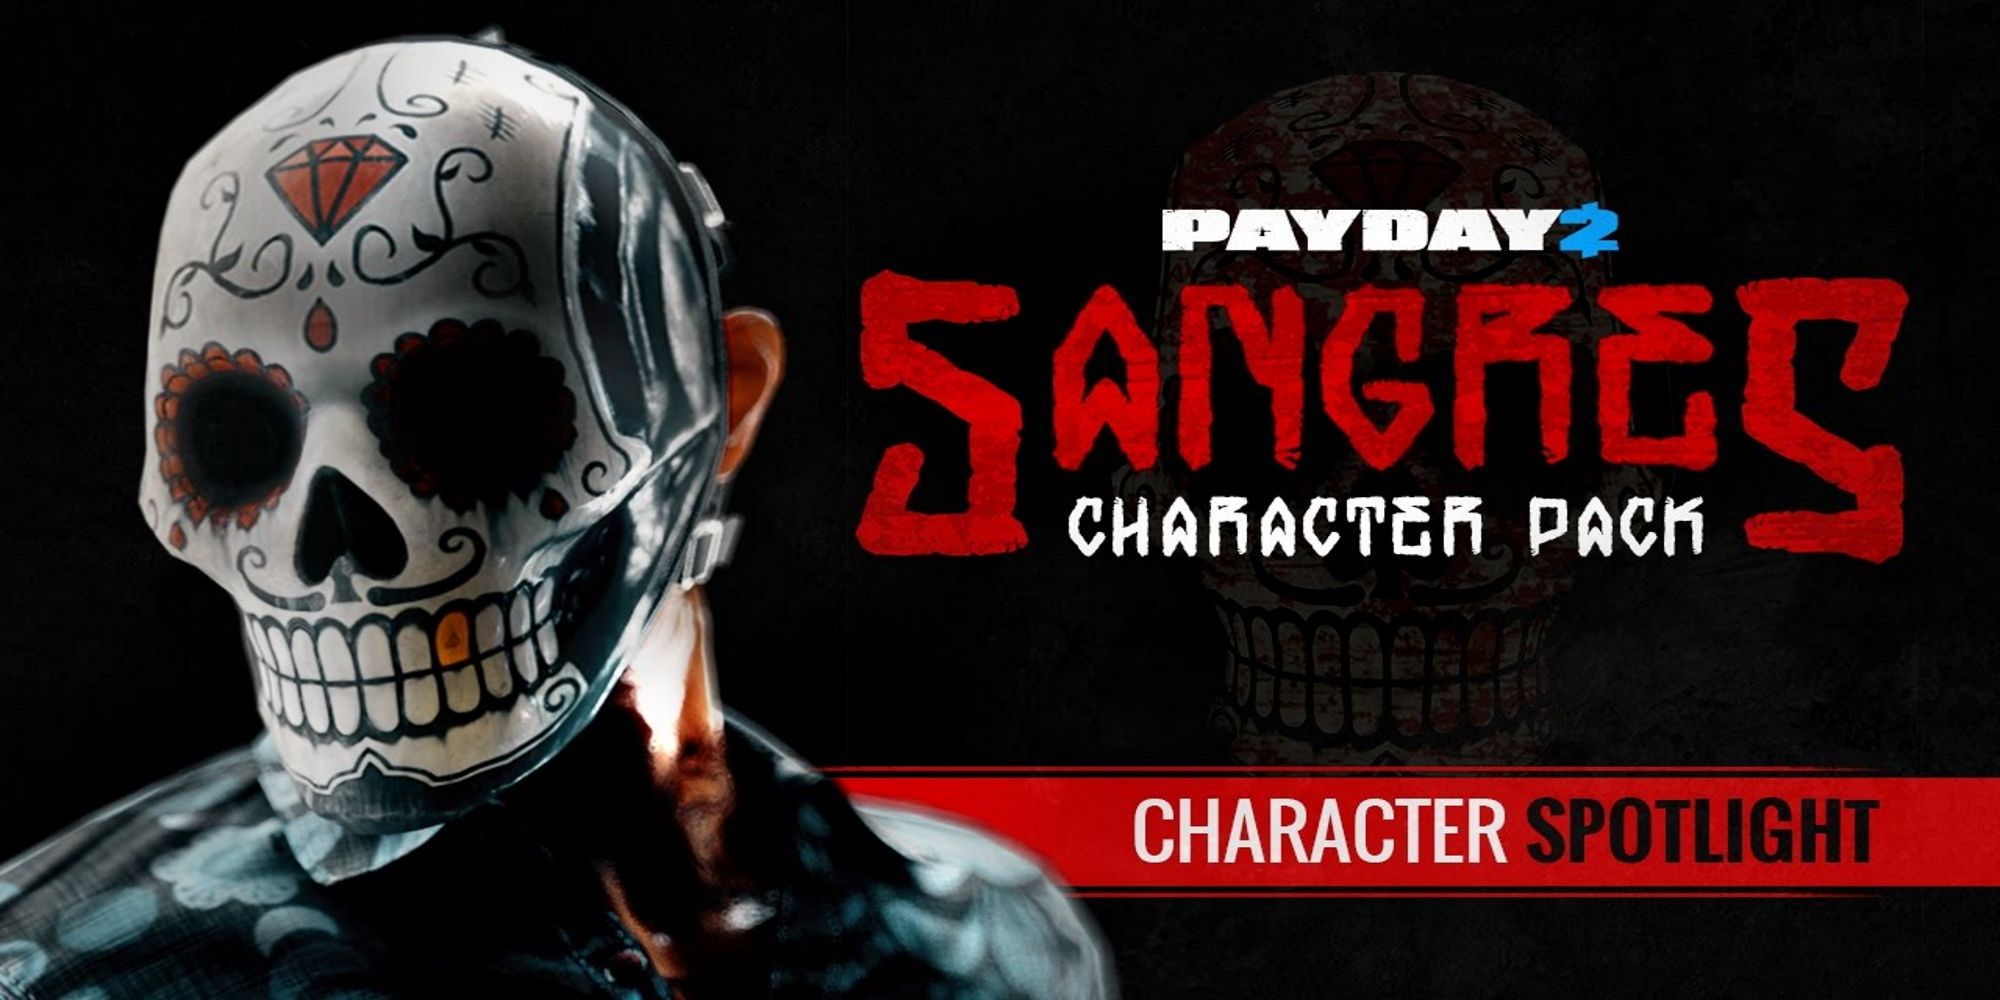 Sangres from PAYDAY 2